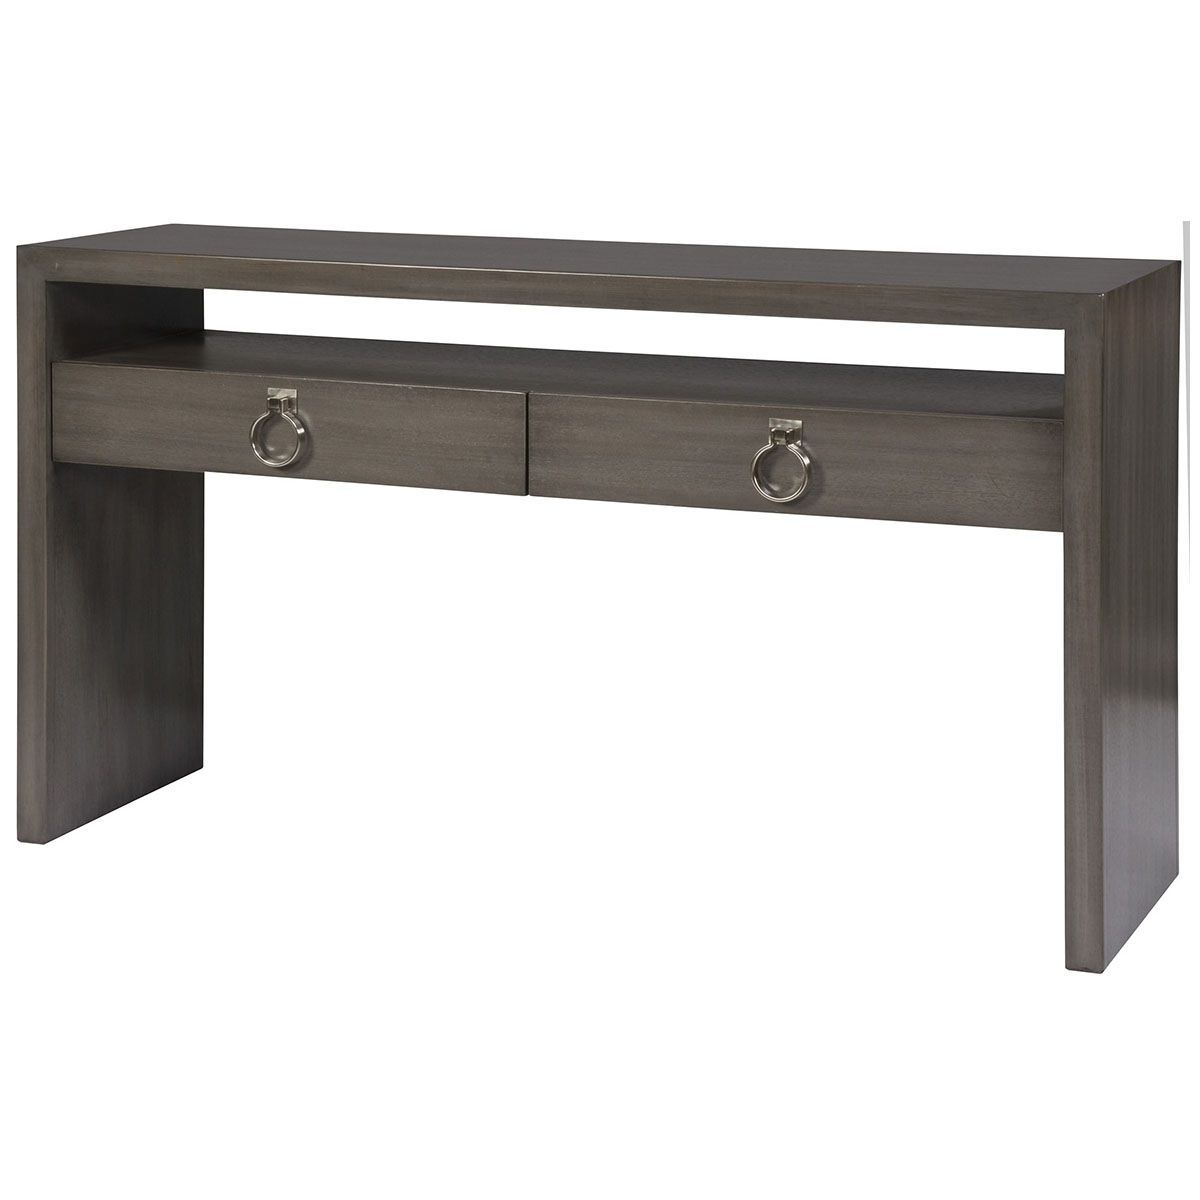 Vanguard Furniture Margo Console W349s Lg | Vanguad Furniture Inside Parsons White Marble Top &amp; Dark Steel Base 48x16 Console Tables (View 16 of 20)